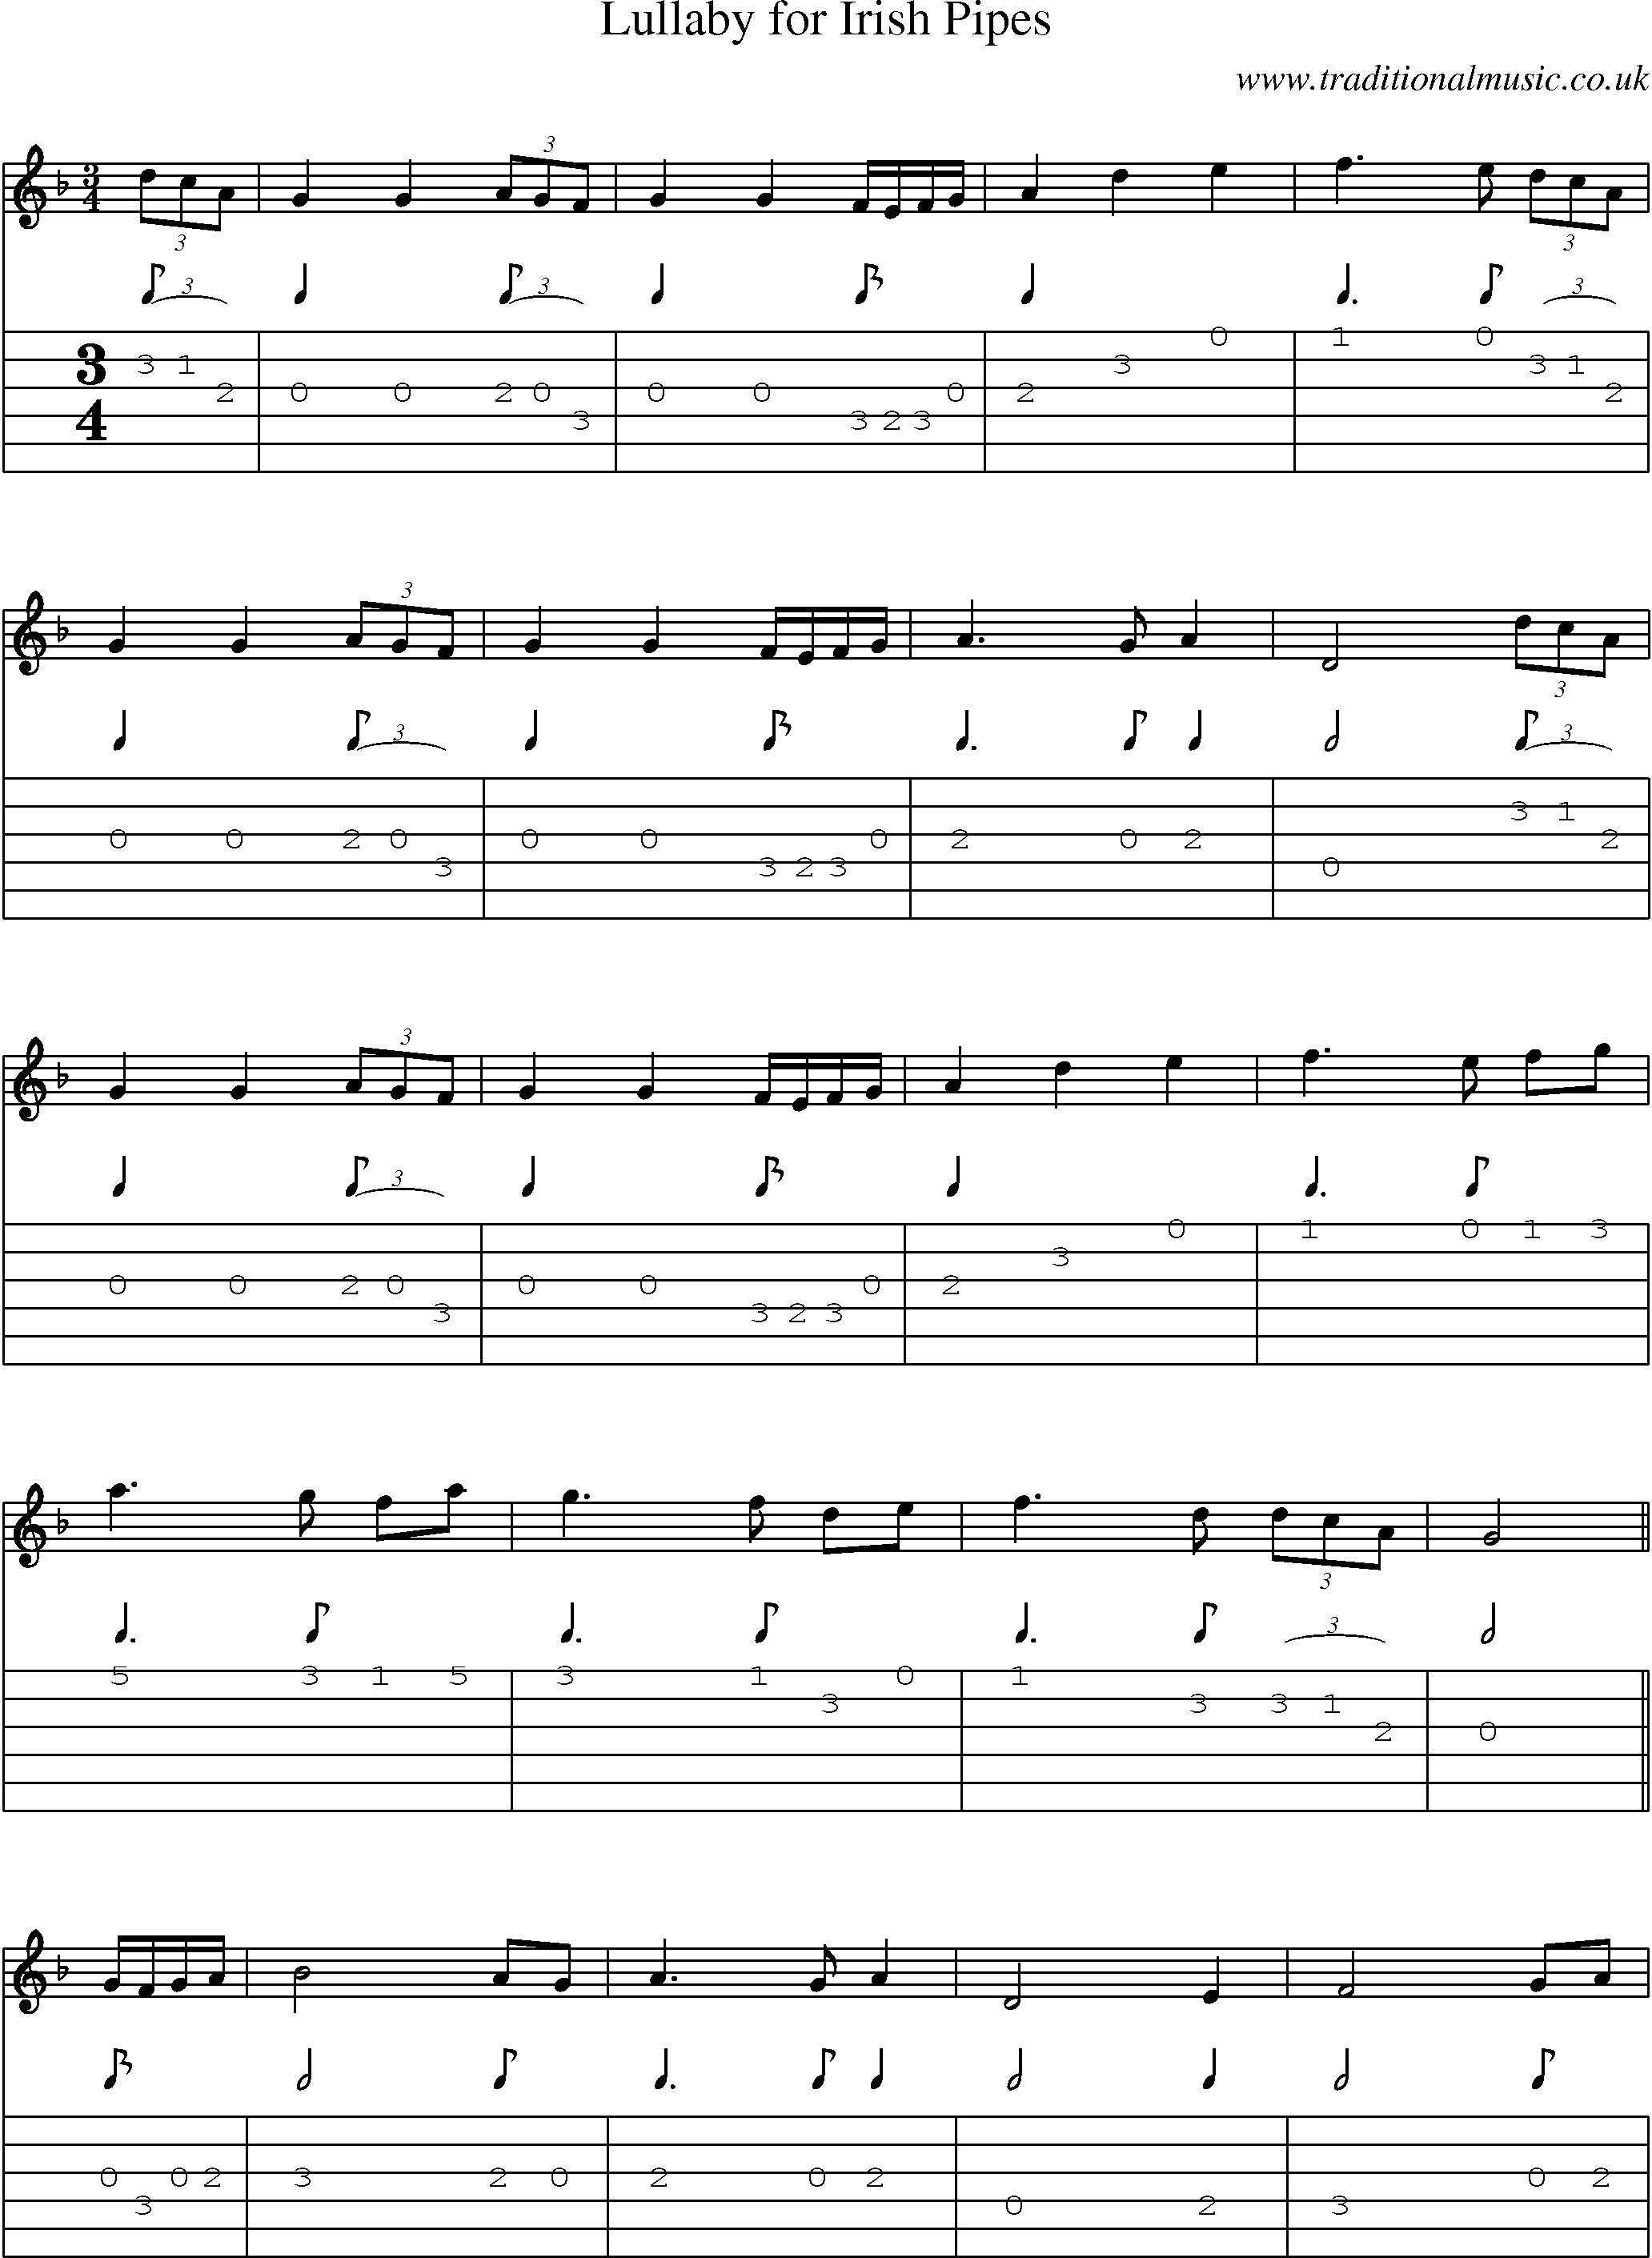 Music Score and Guitar Tabs for Lullaby For Irisipes